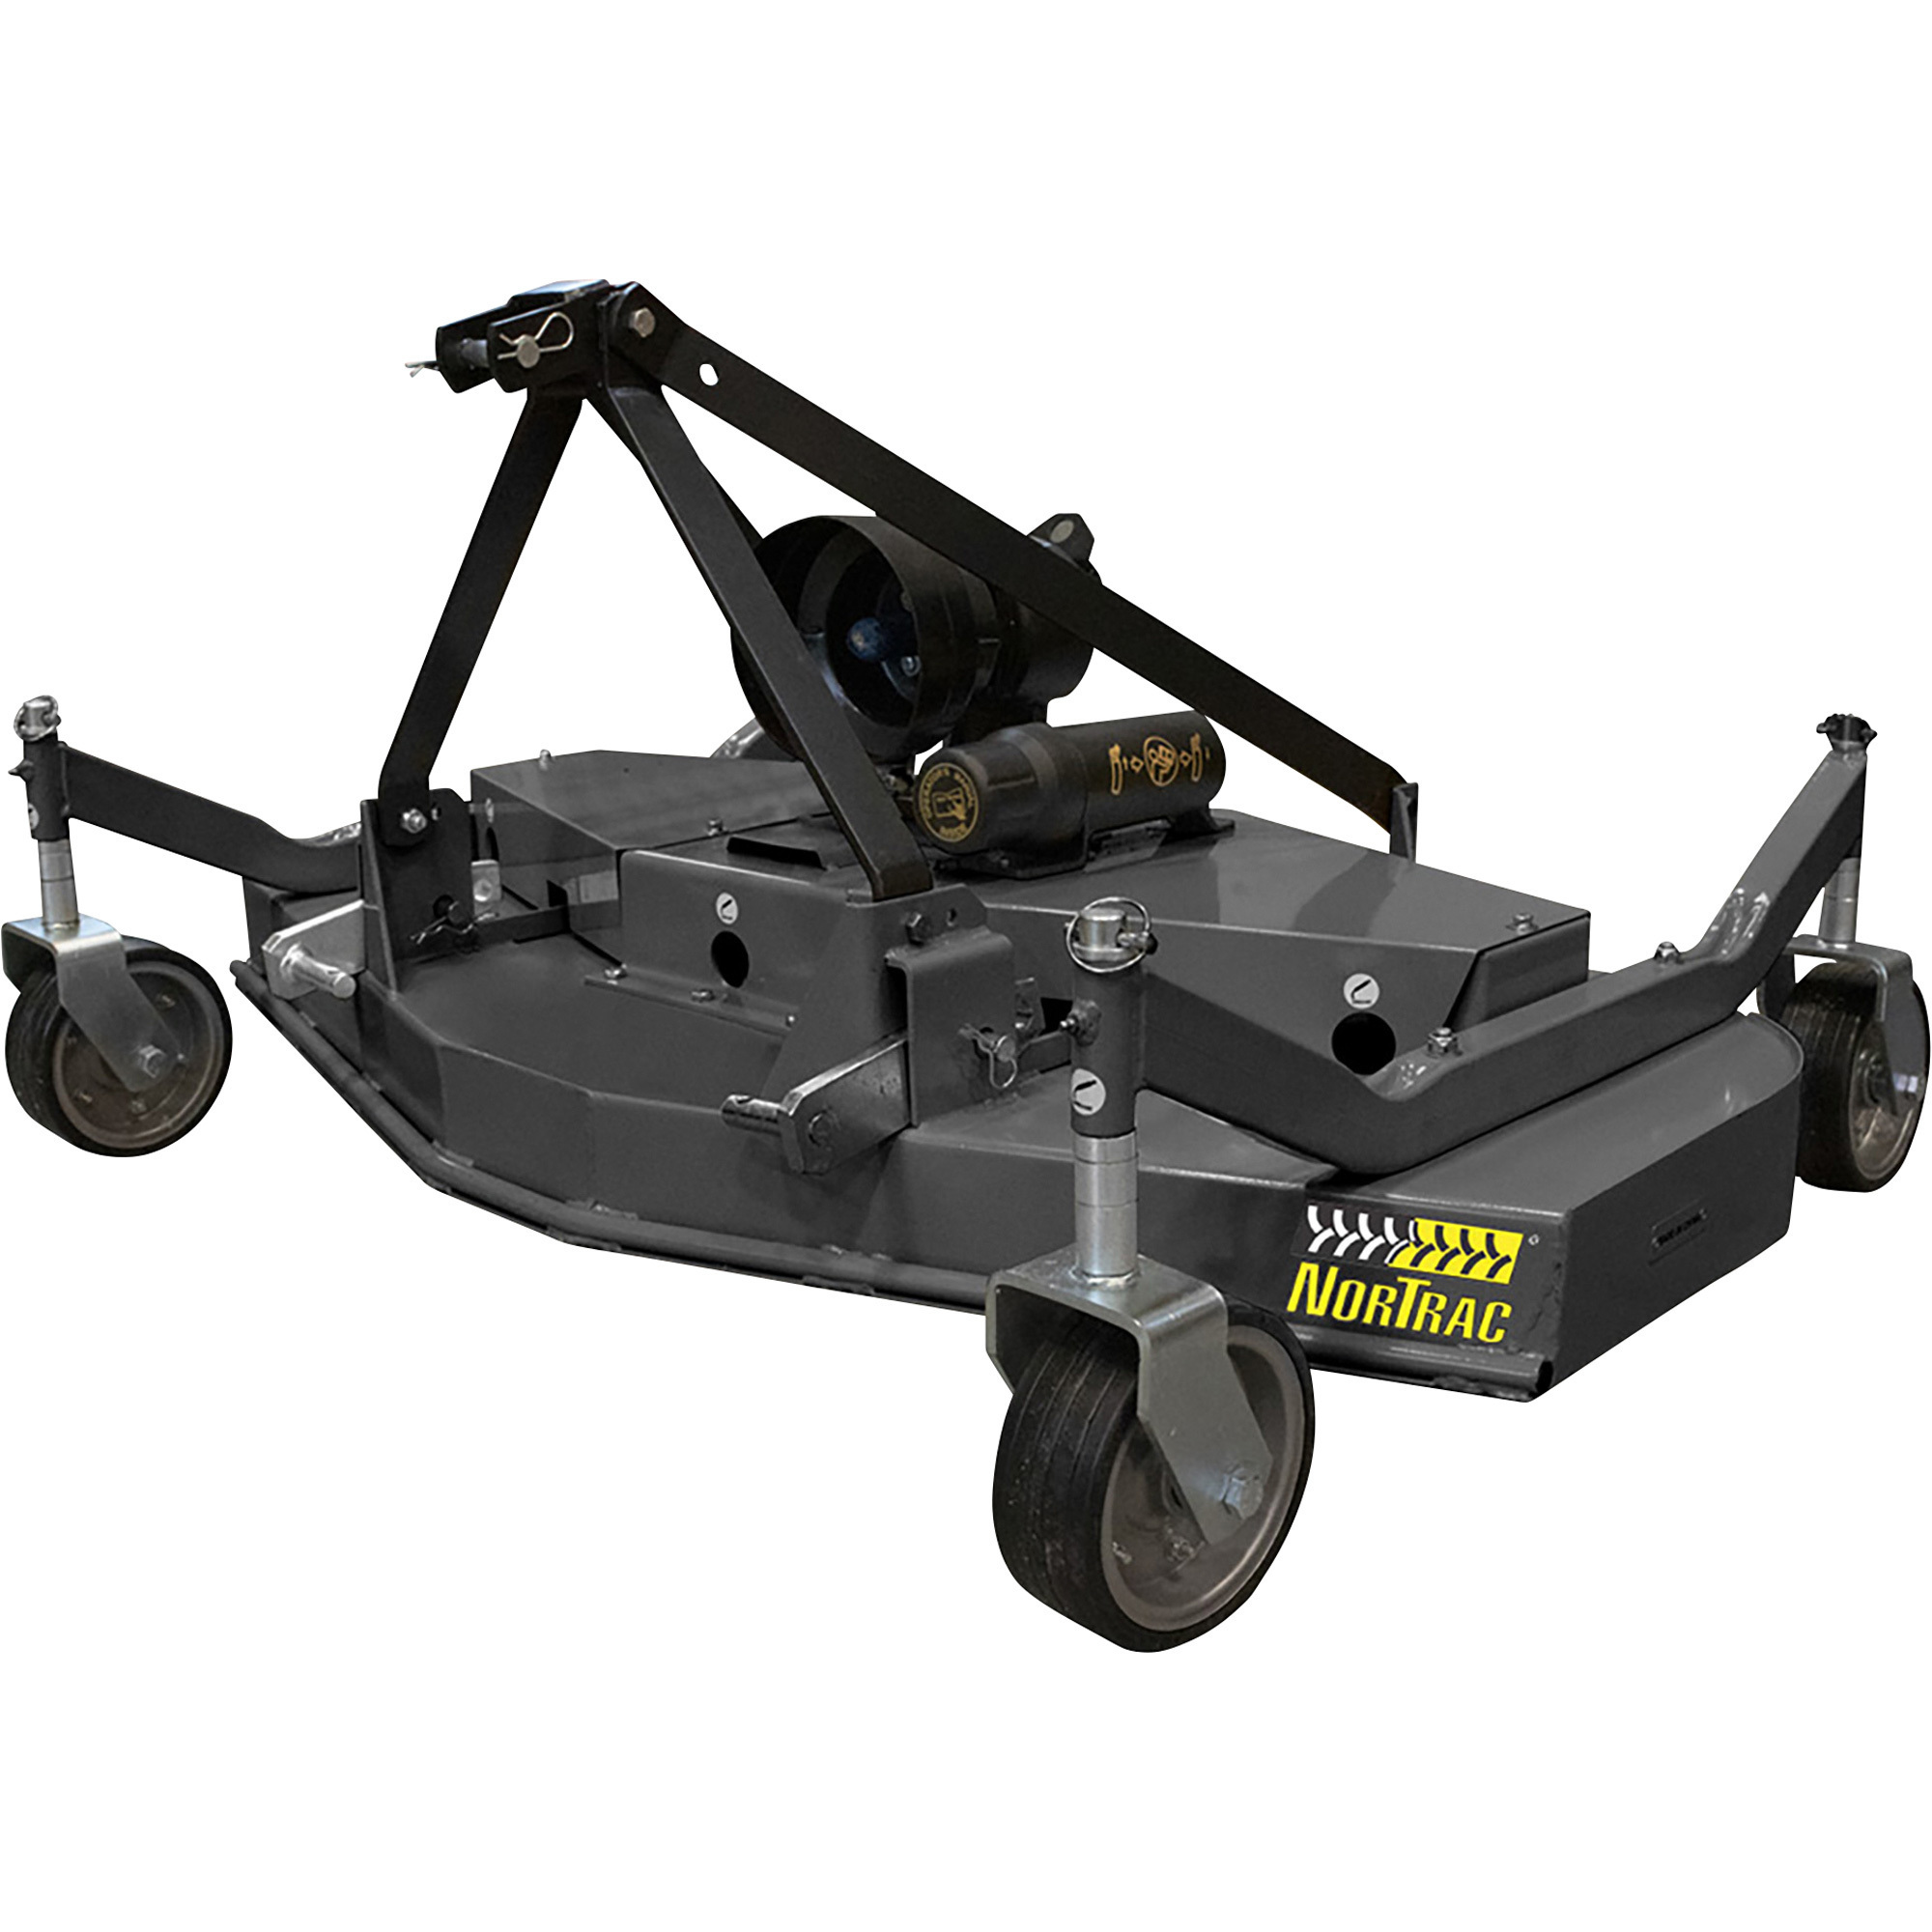 NorTrac Category 1 3-Pt. PTO Finish Mower, 72Inch Cutting Width